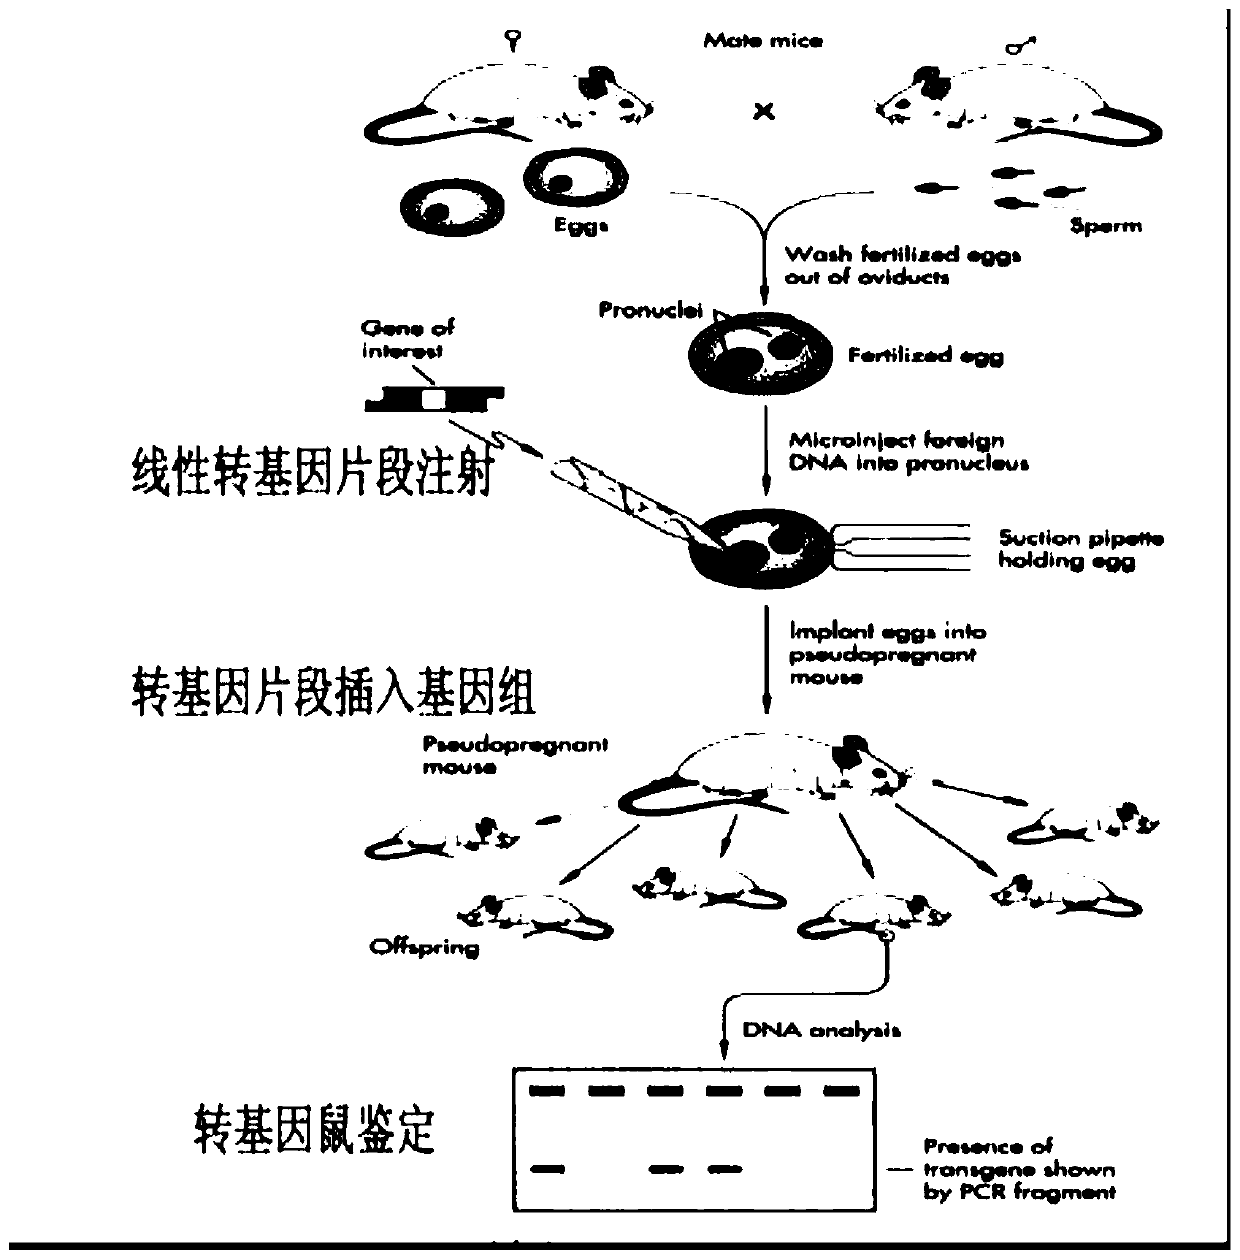 The application of gene and the construction method of animal model